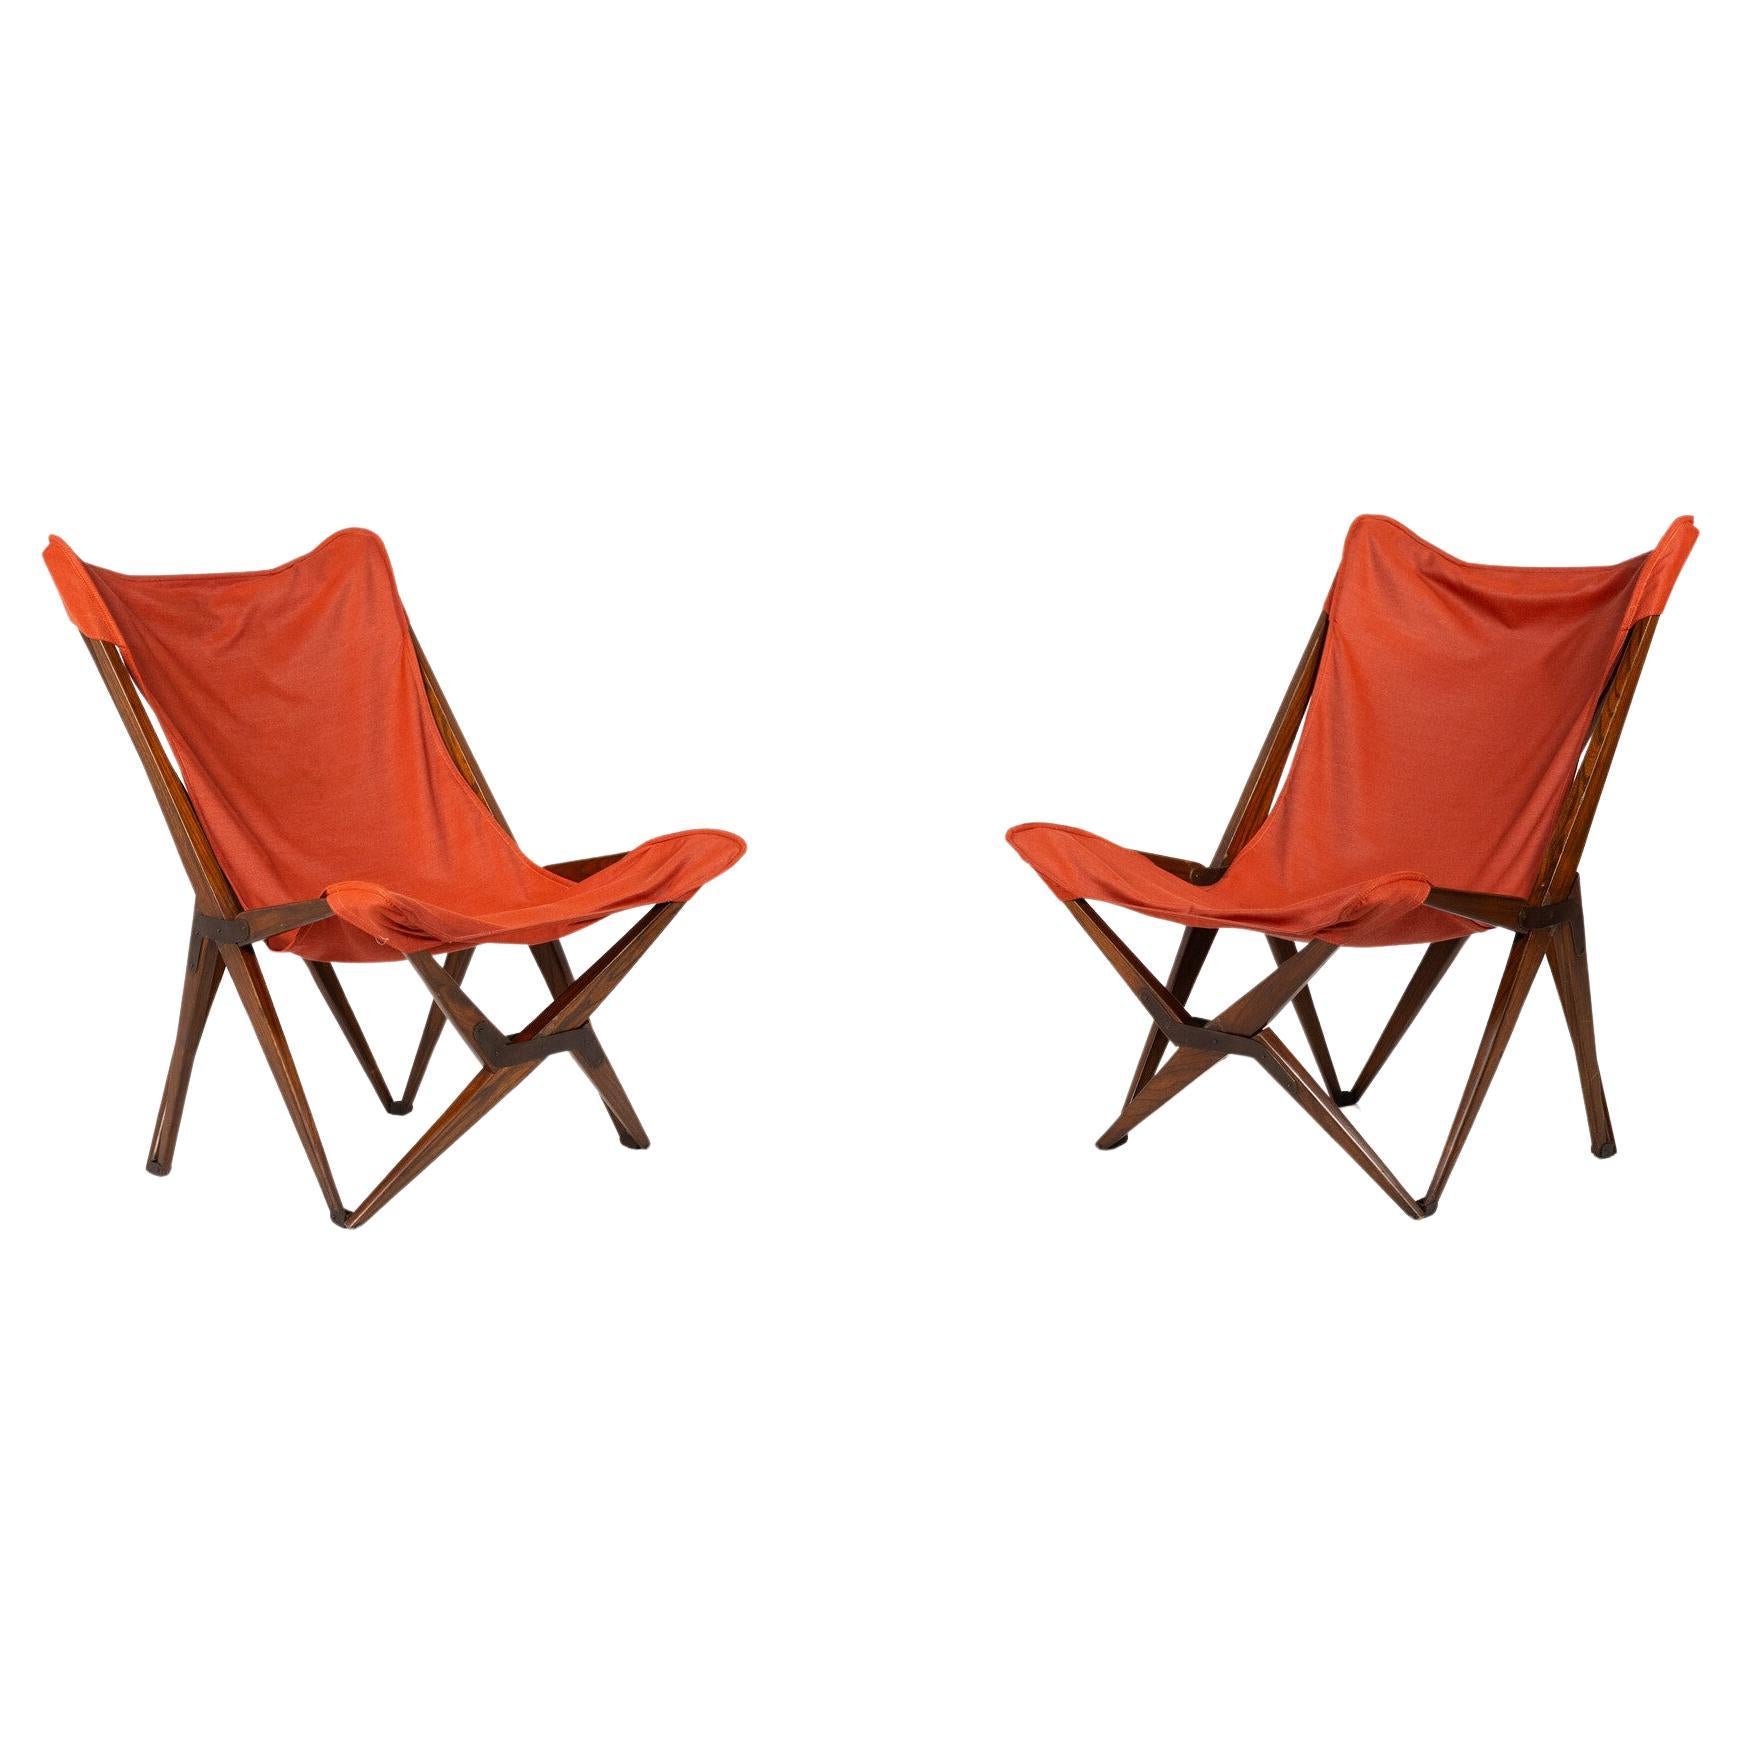 Pair of Red Tripolina Folding Chairs by Joseph B. Fenby